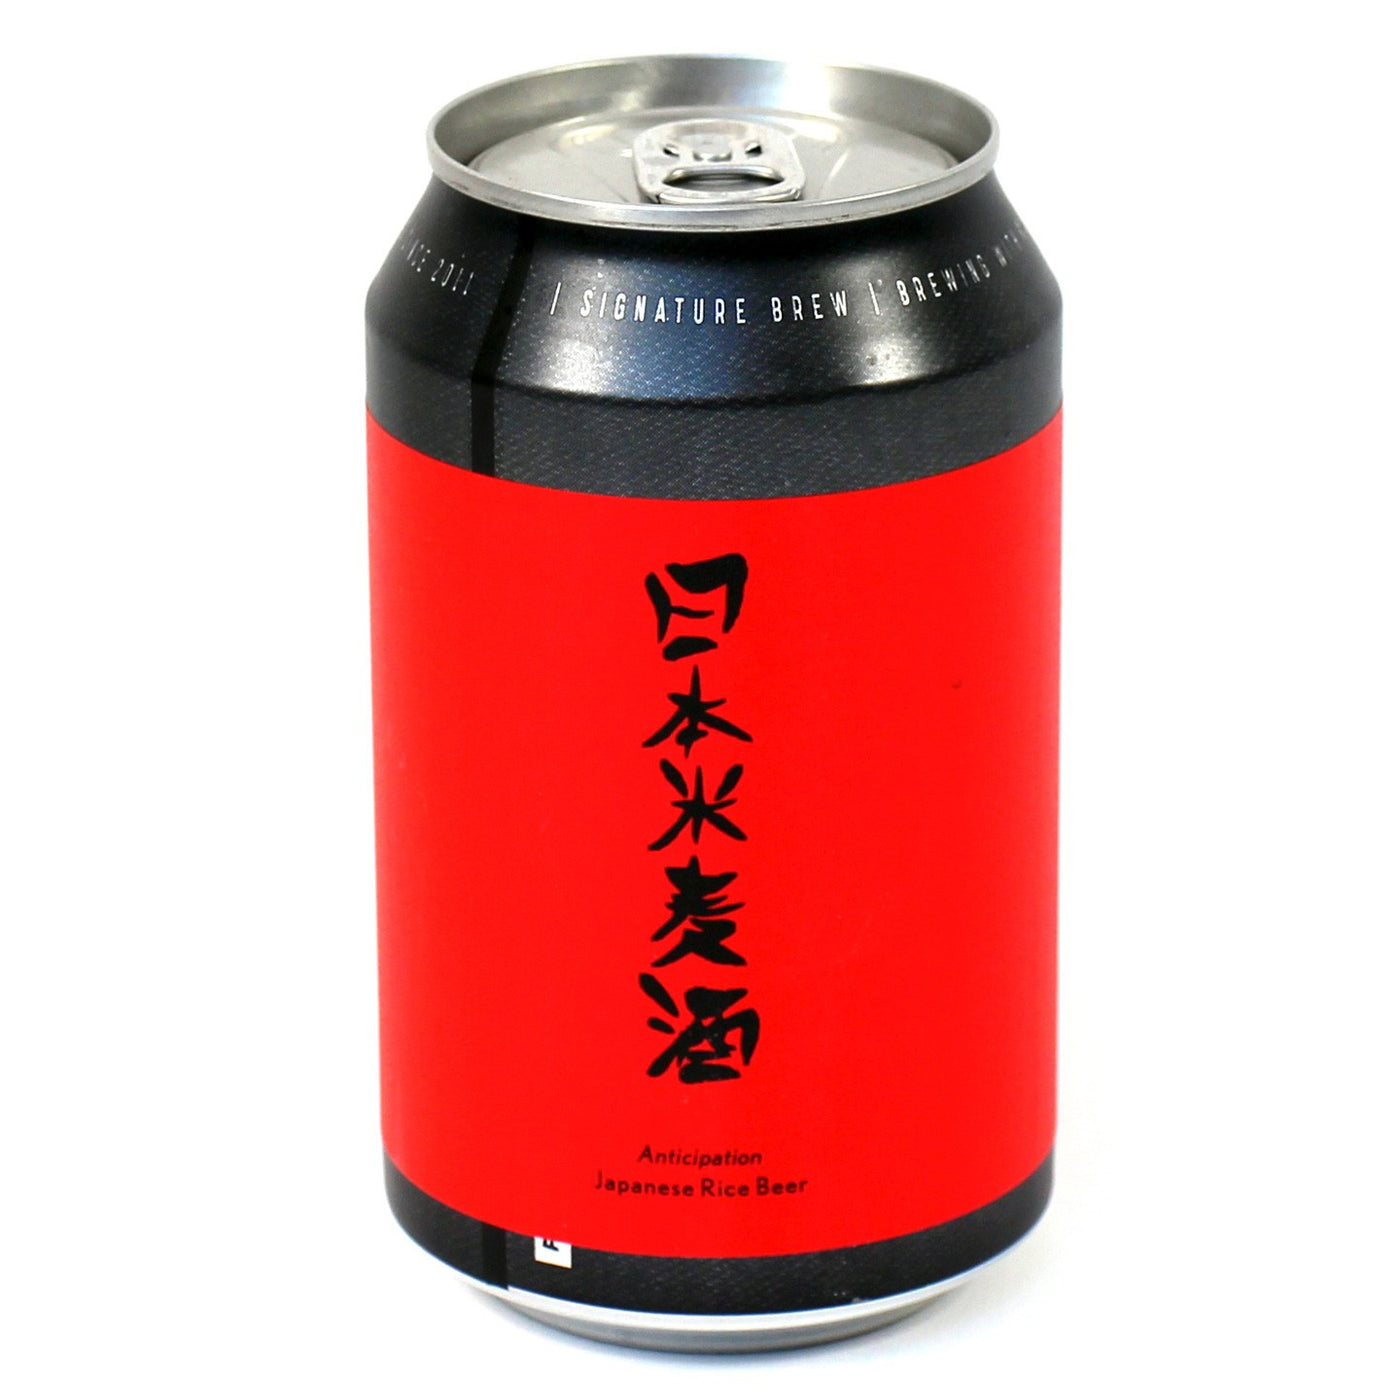 Signature Brew Anticipation Japanese Rice Beer Yeastie Boys collaboration 330ml can